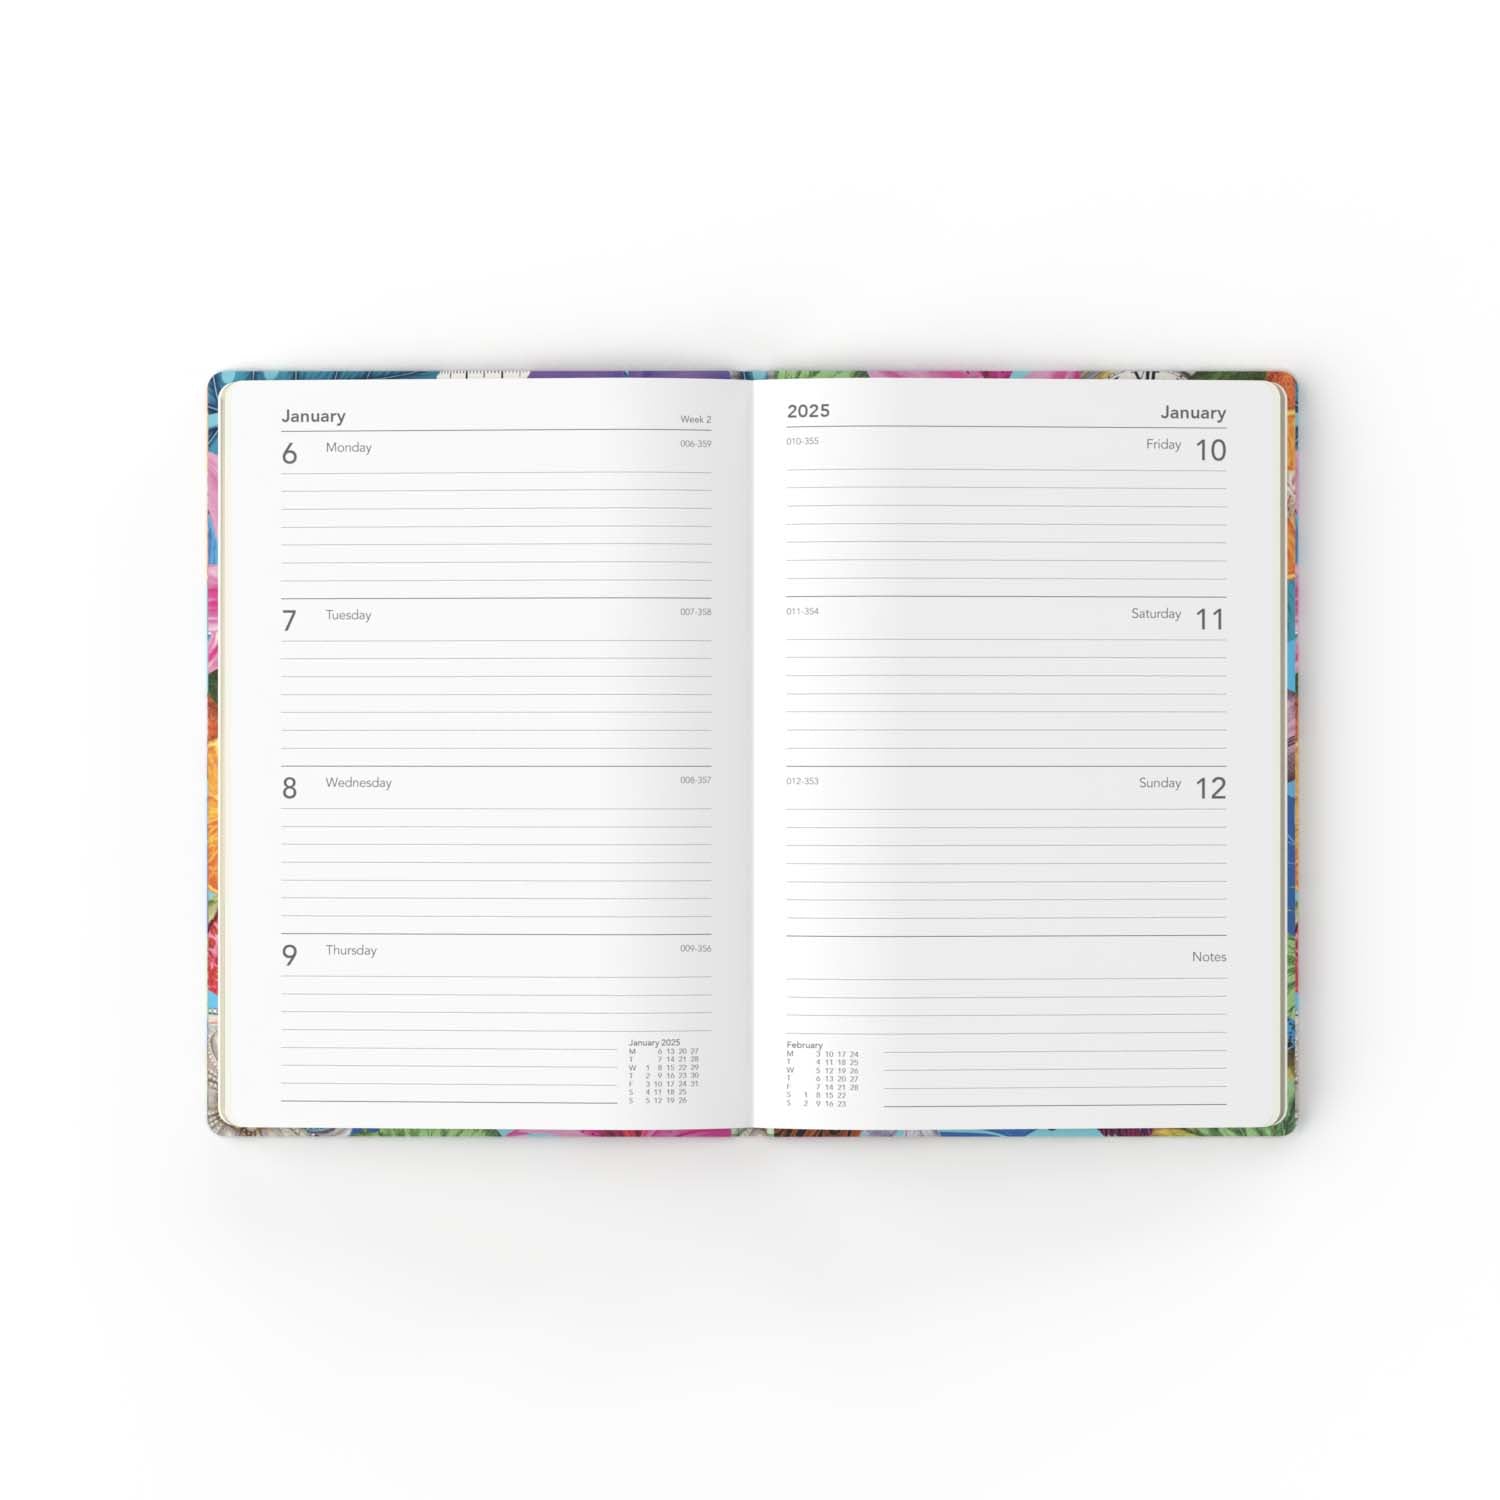 Maximalism - A5 Week-to-View 2024-2025 Financial Year Diary/Planner